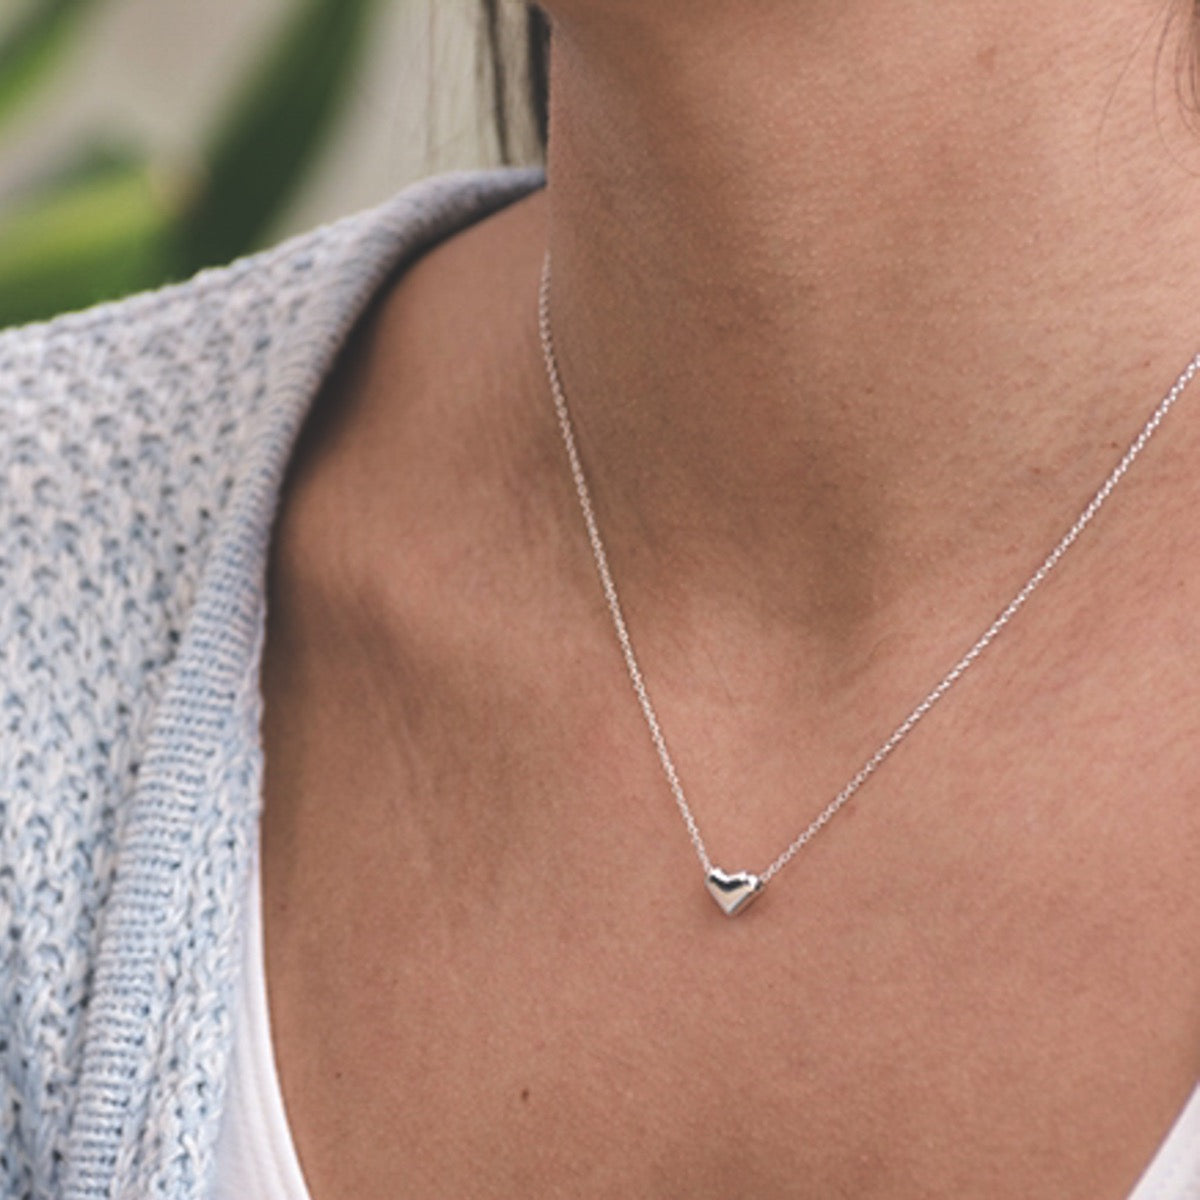 Mini Sterling Silver Heart Necklace By Hersey Silversmiths |  notonthehighstreet.com